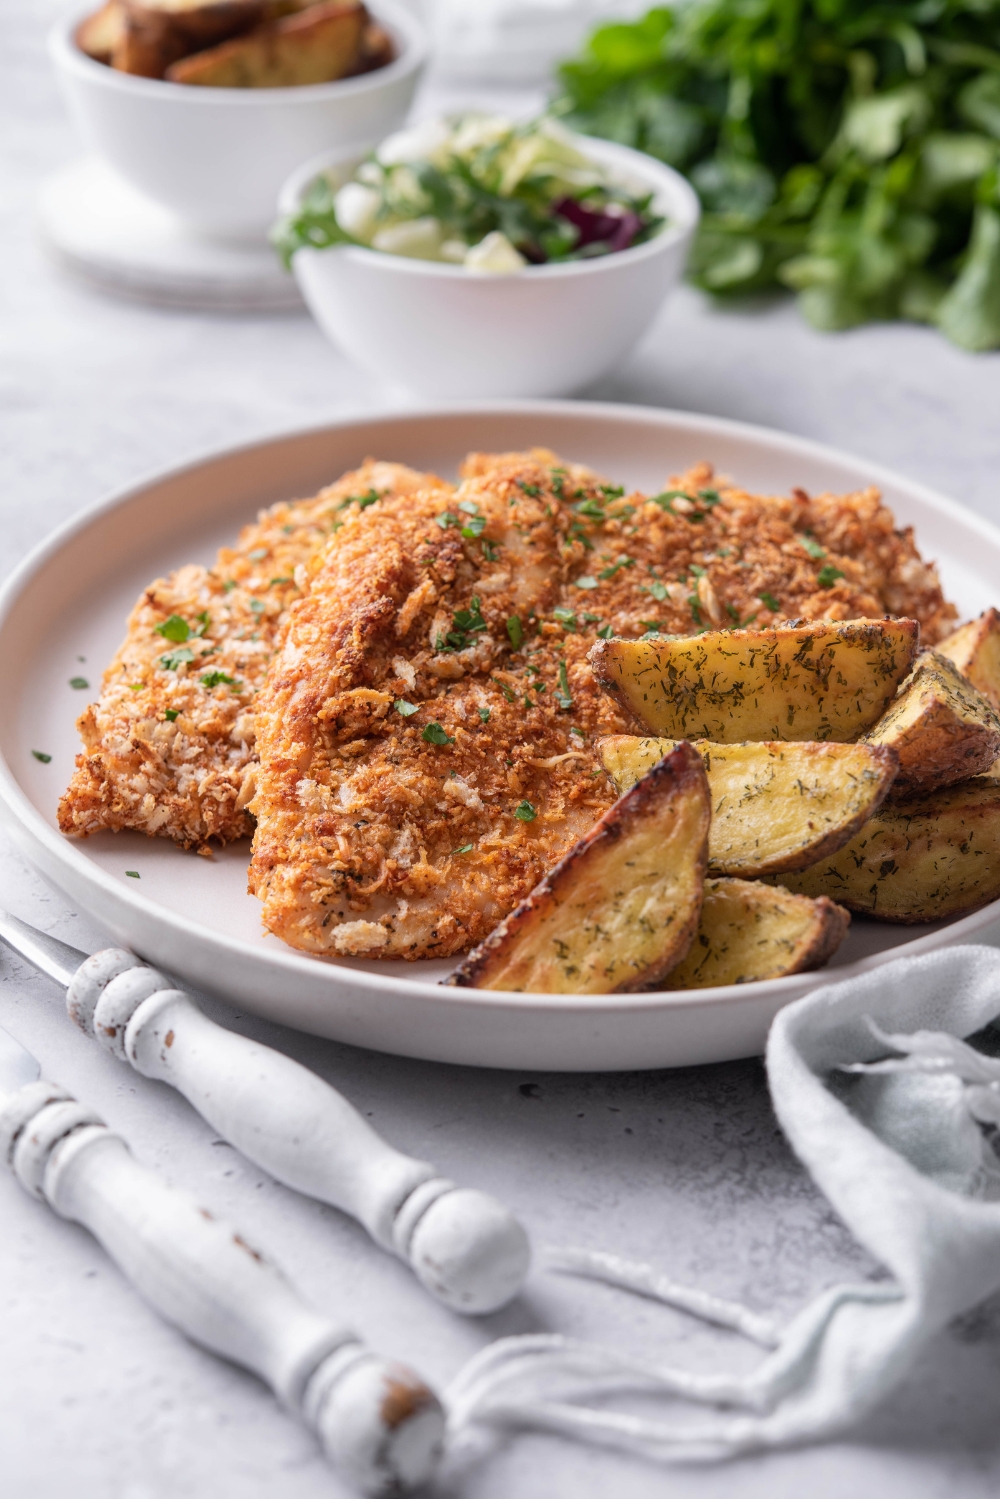 A plate of seasoned baked chicken cutlets garnished with fresh herbs and served with a side of potato wedges. There's a set of silverware next to the plate.